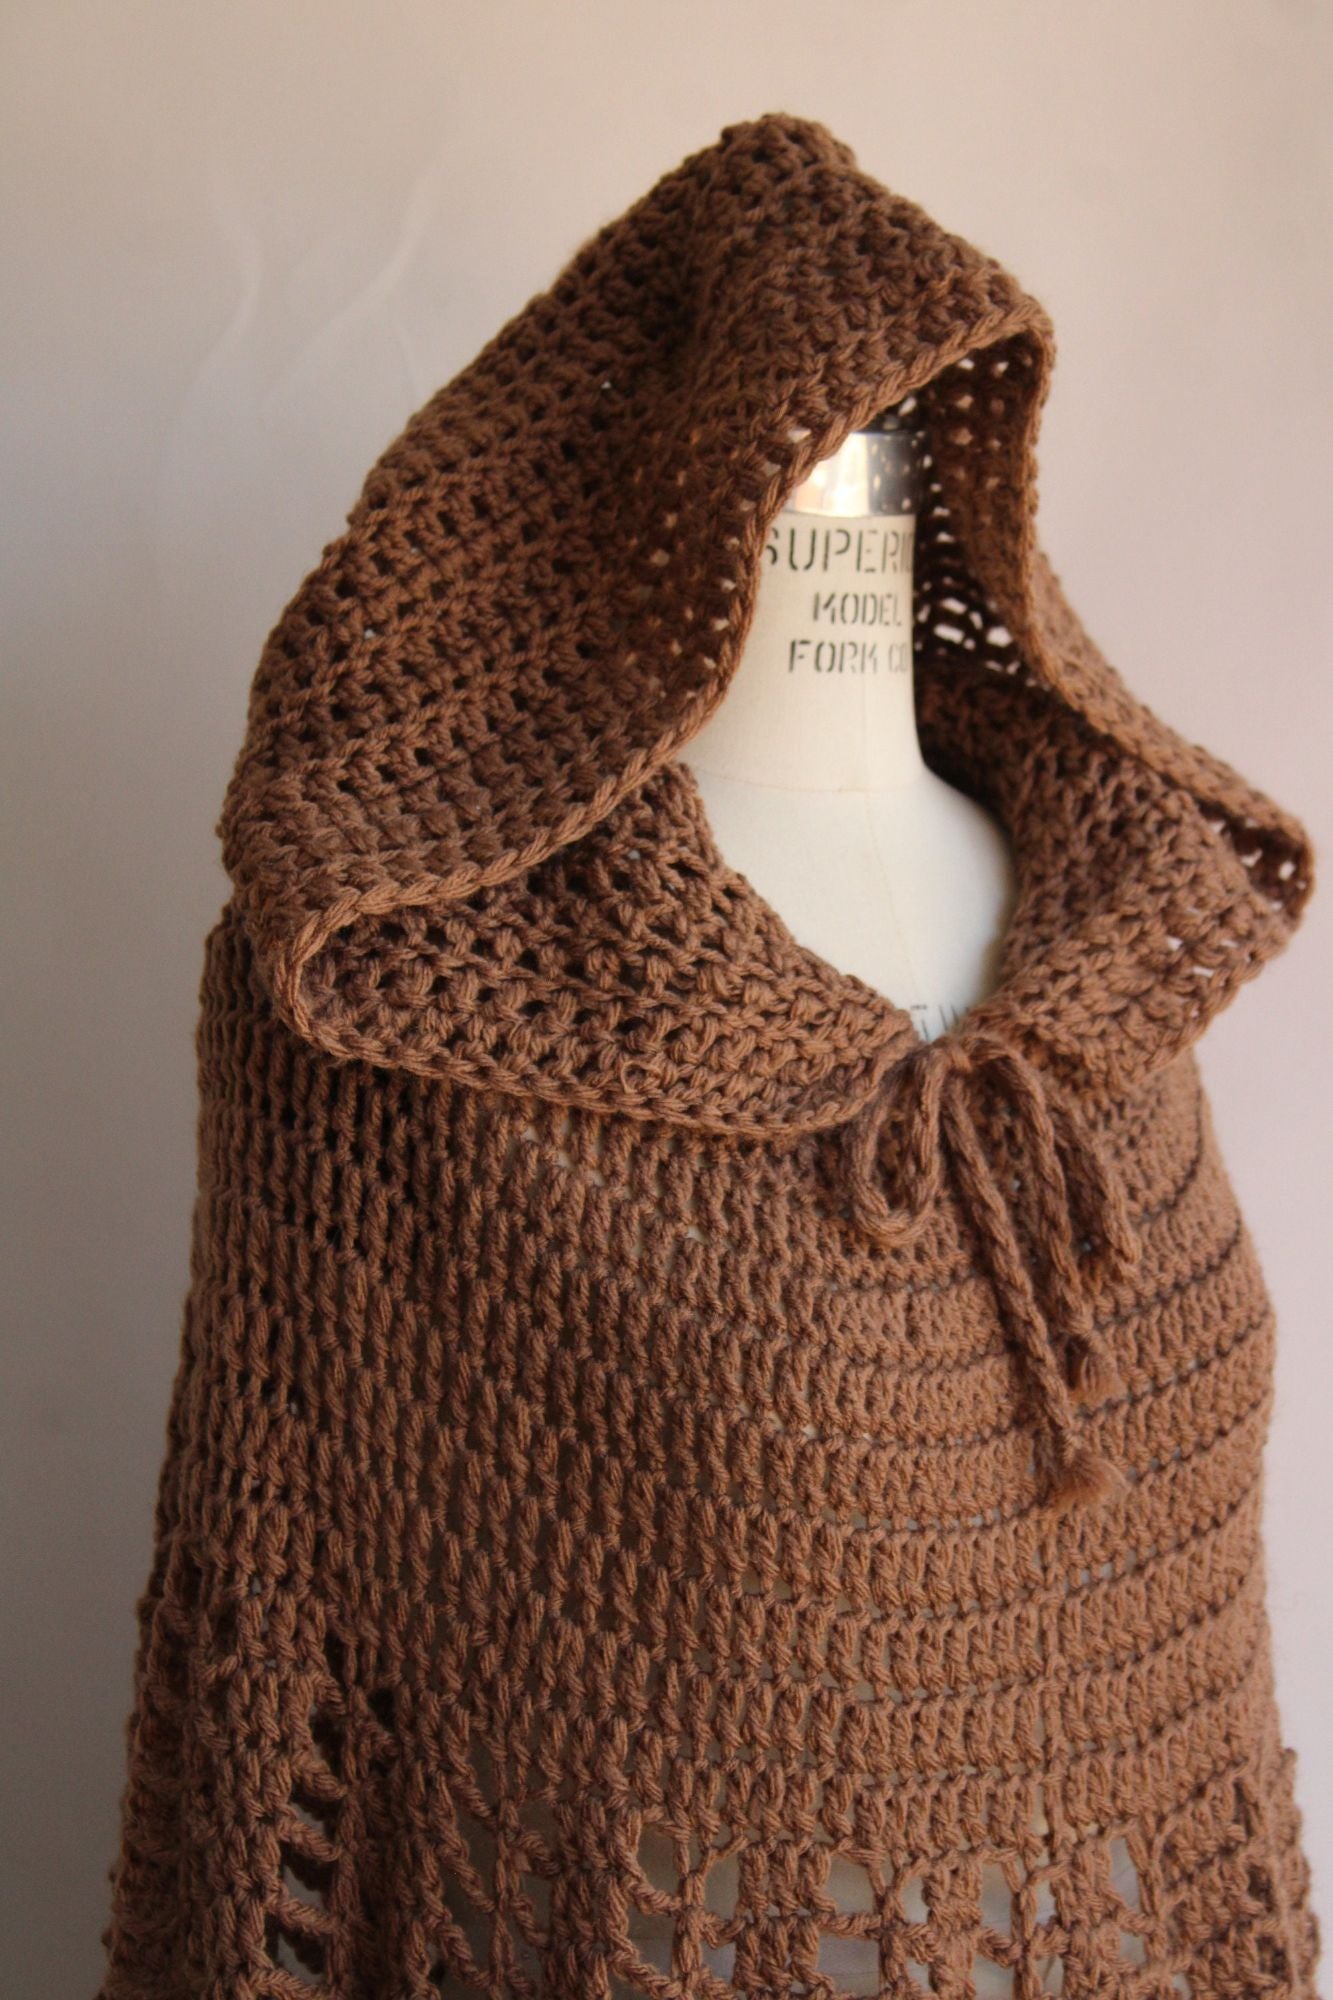 Vintage 1960s 1970s Poncho with Hood in a Brown Knit with Drawstring Tie